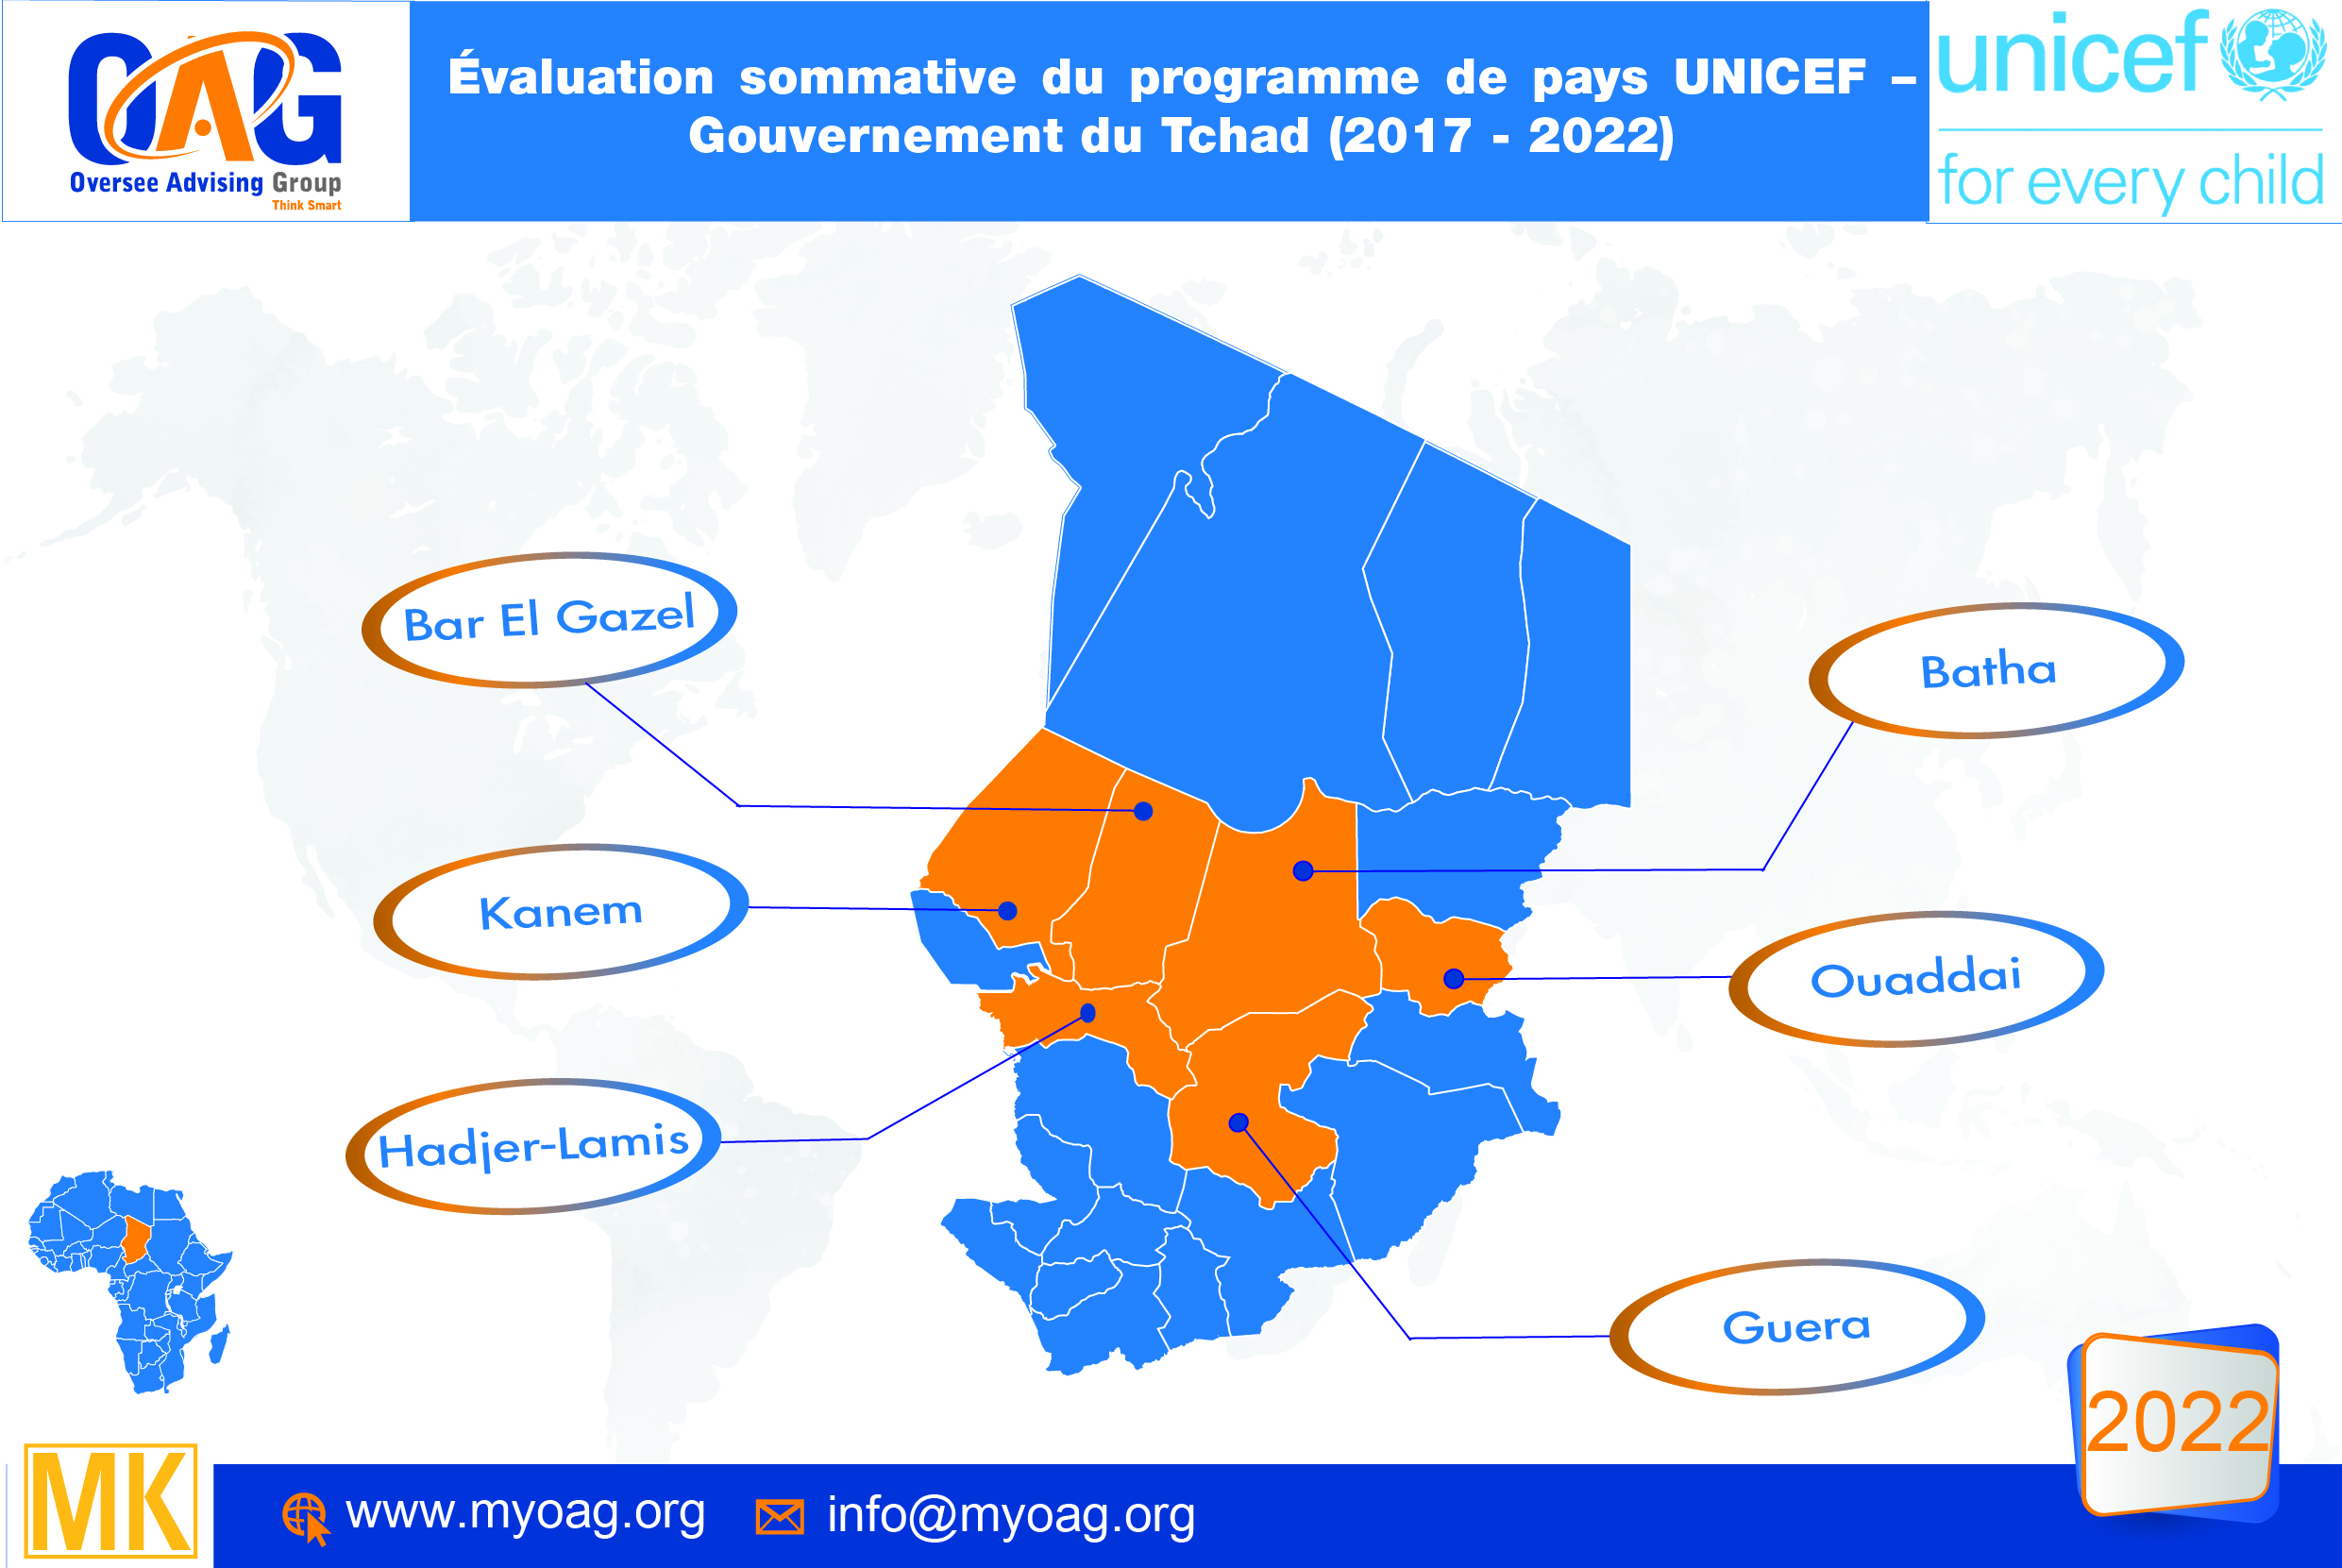 Tchad : OAG has been awarded the contract for the evaluation of UNICEF Chad country programme 2017-2022